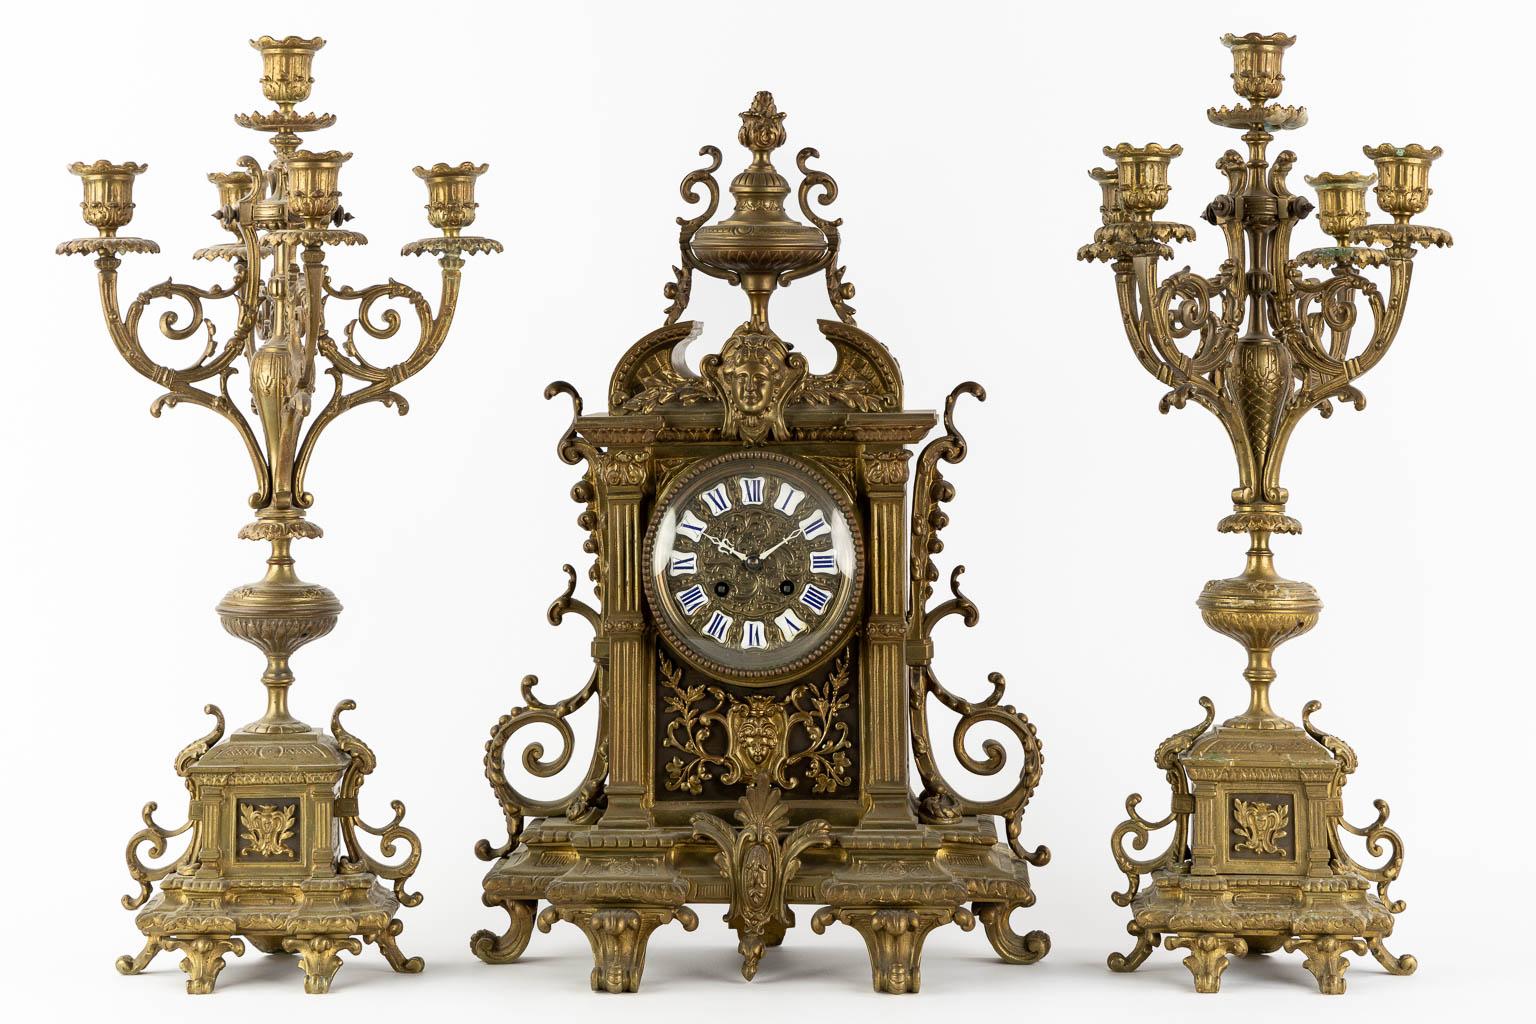 A three-piece mantle garniture clock and candelabra, patinated bronze. (L:16 x W:33 x H:50 cm) - Image 3 of 13